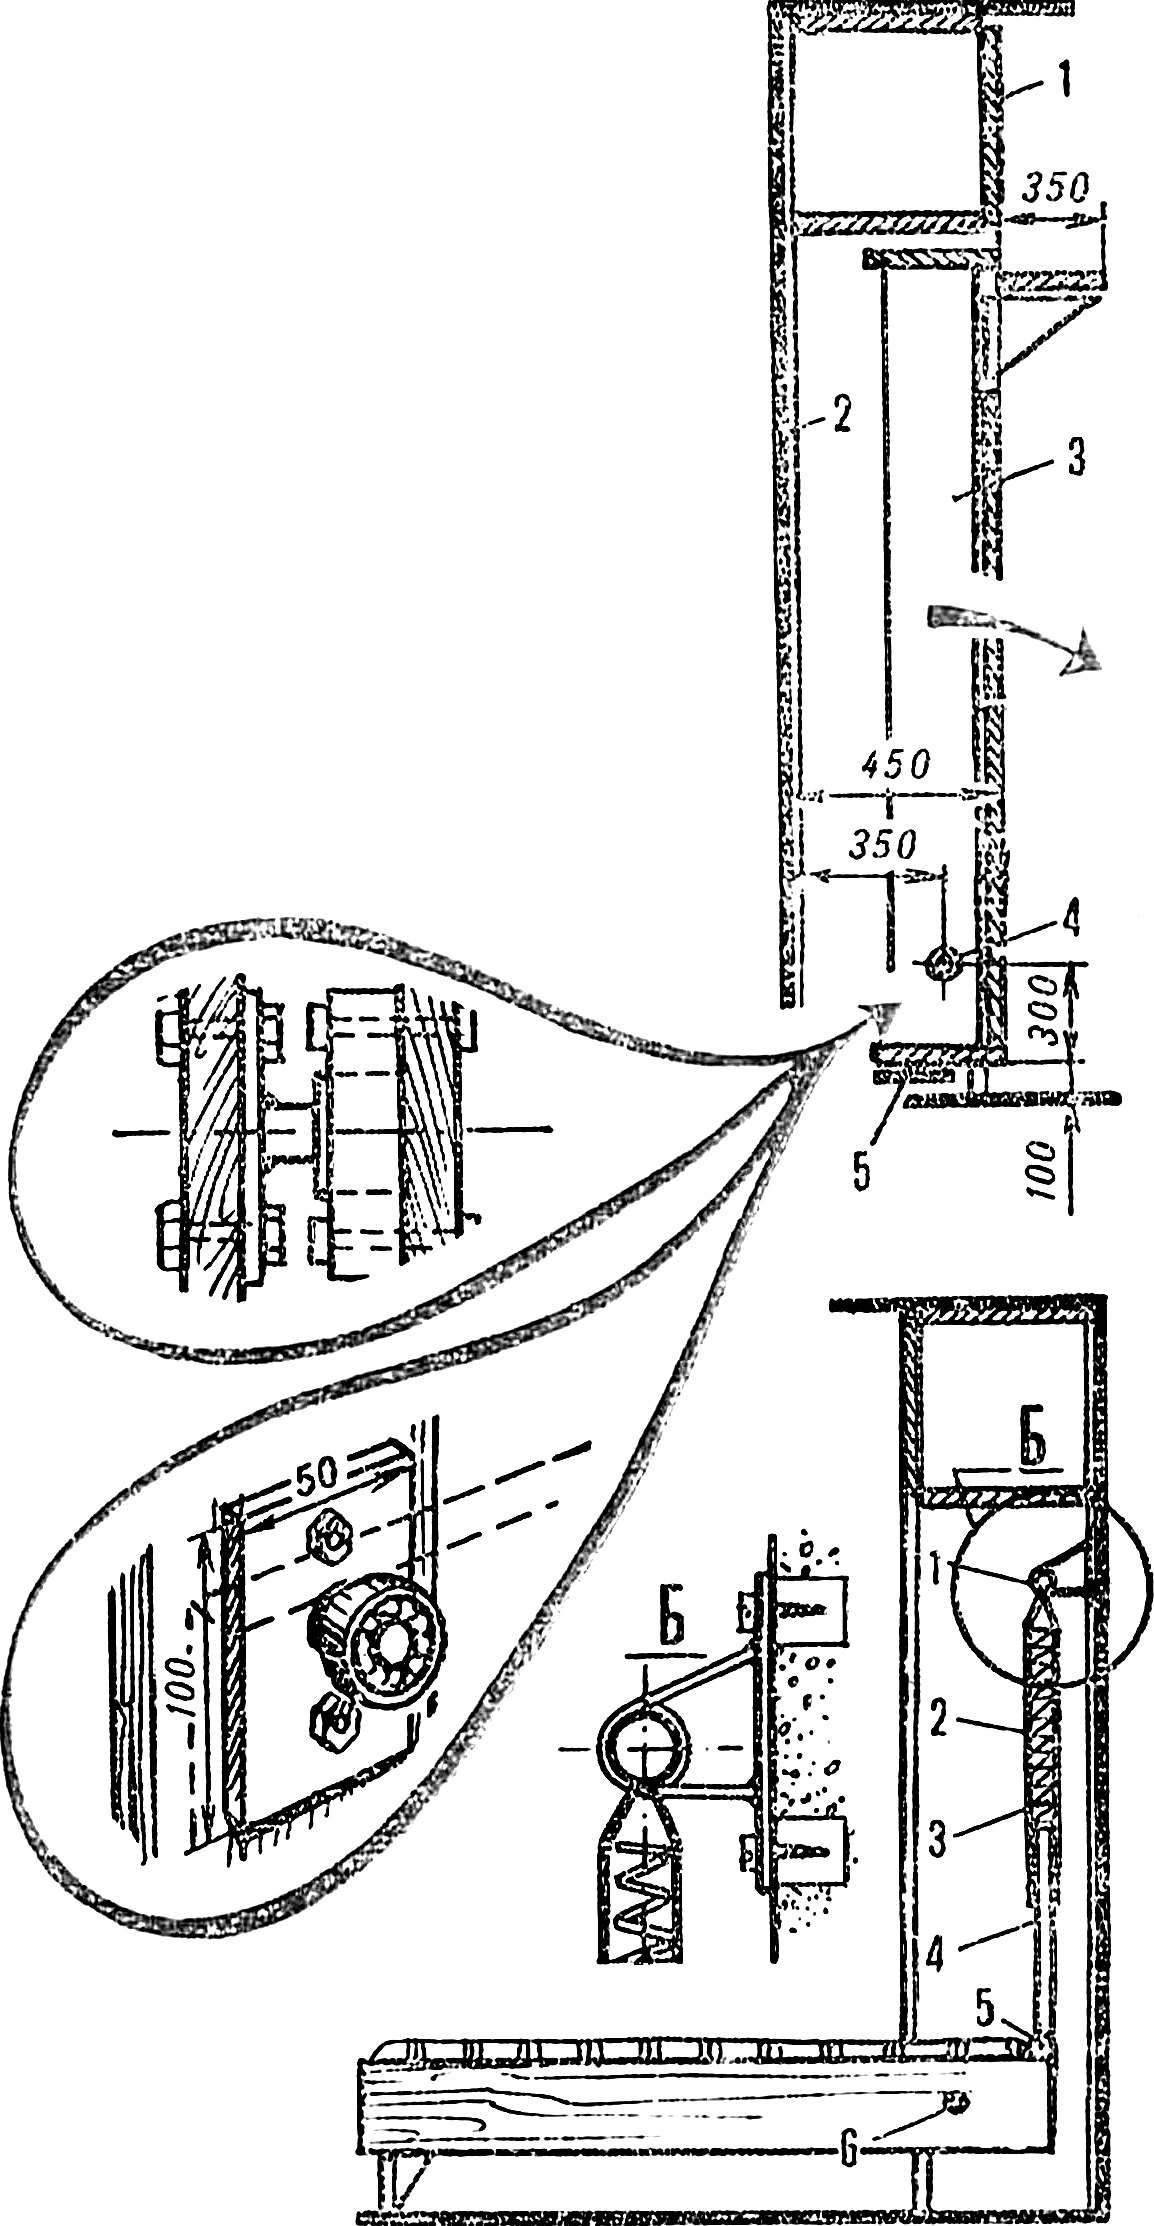 Fig. 2. The bed section of the Cabinet.